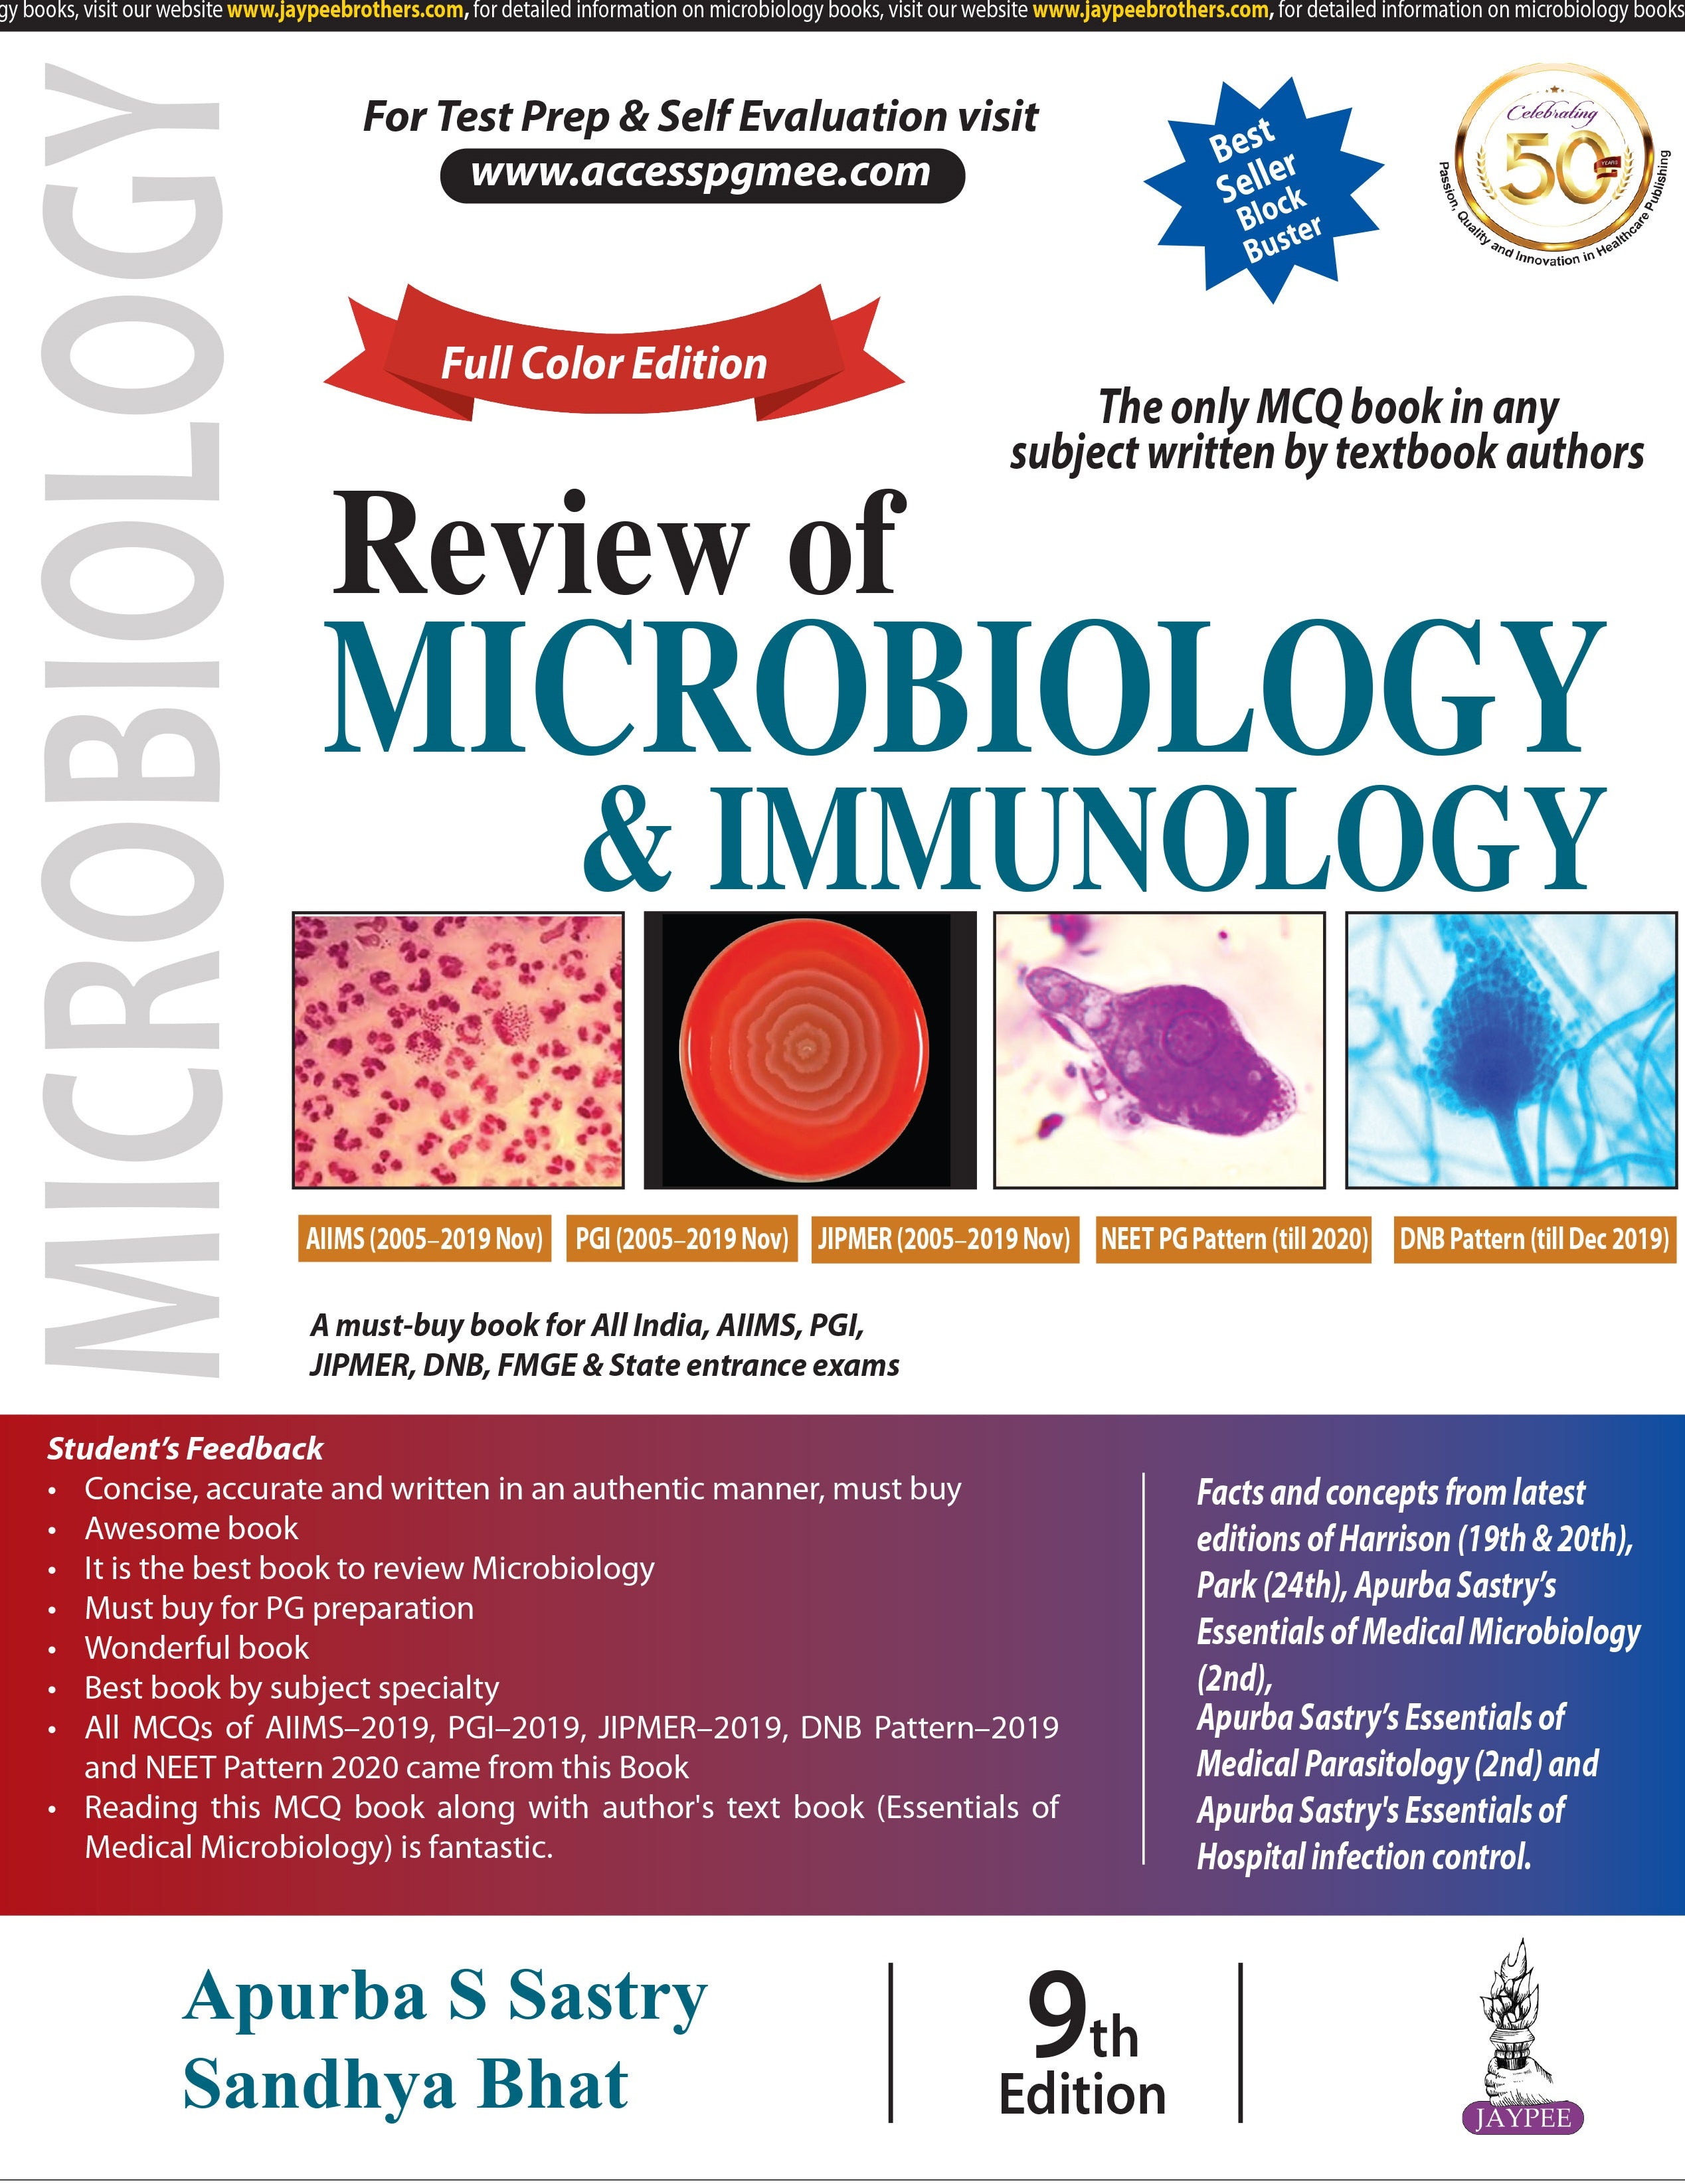 Review of Microbiology & Immunology
9th Reprint by Apurba S Sastry